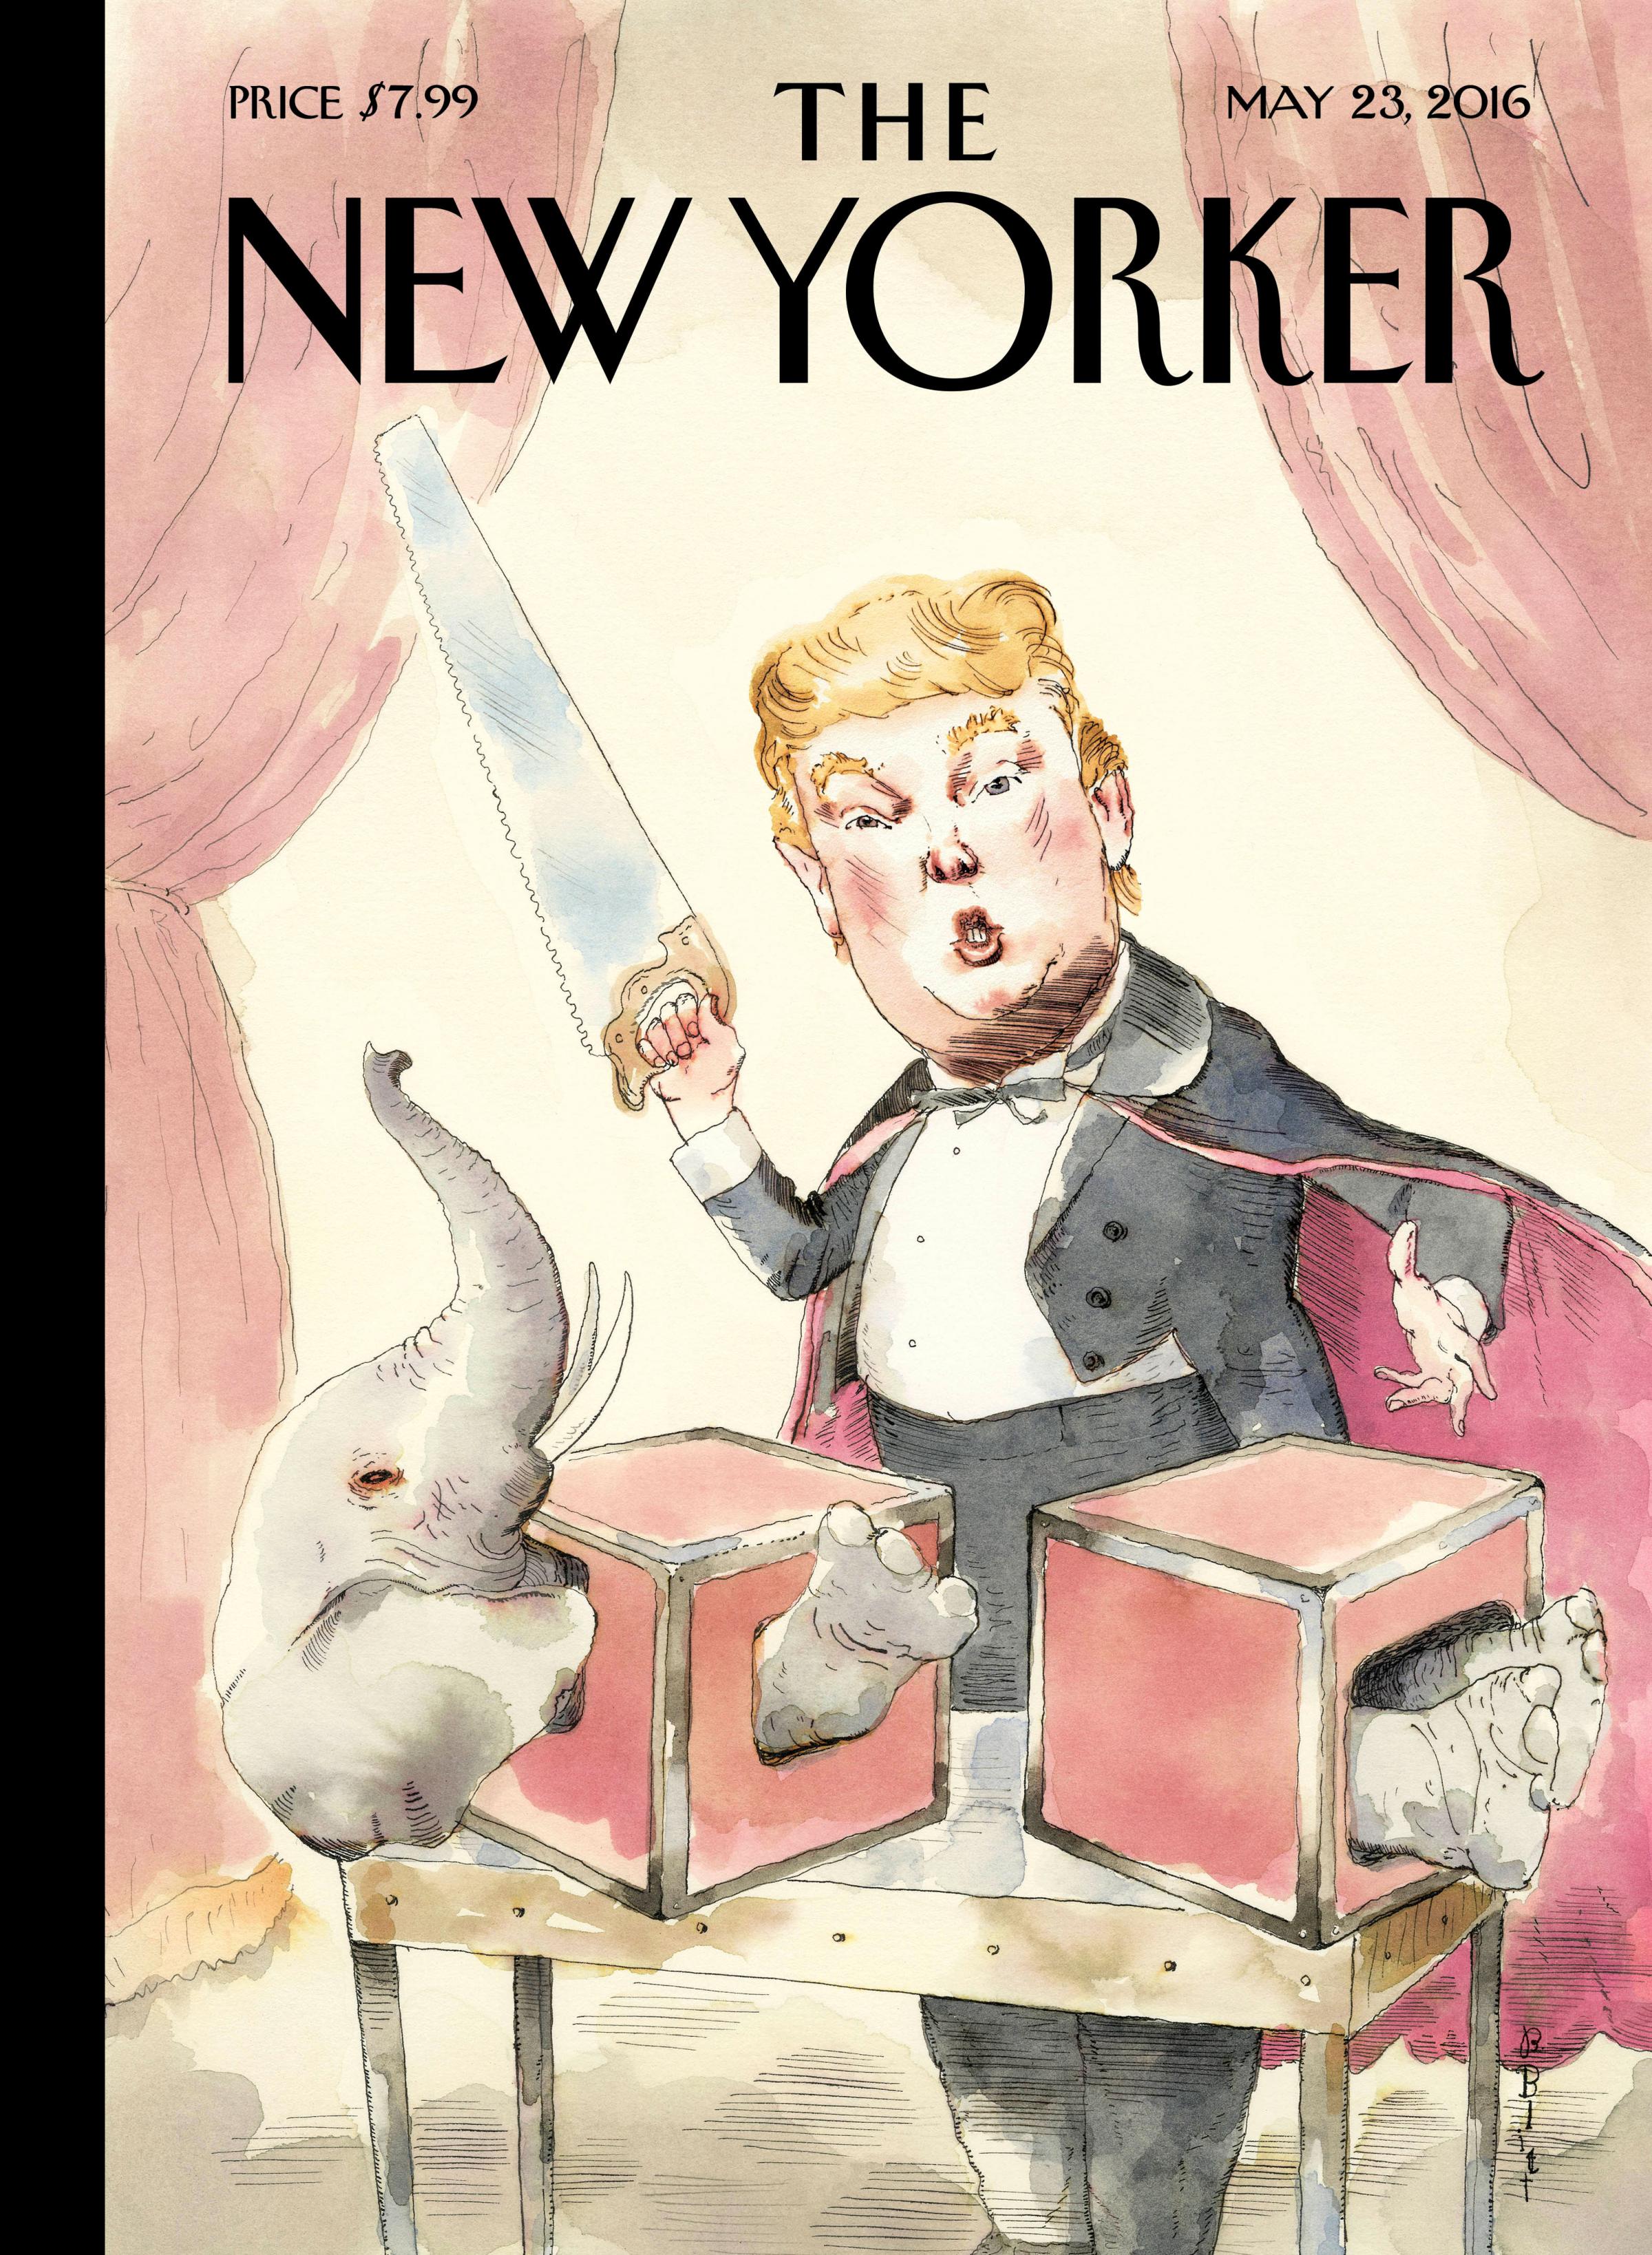 The New Yorker, 2016